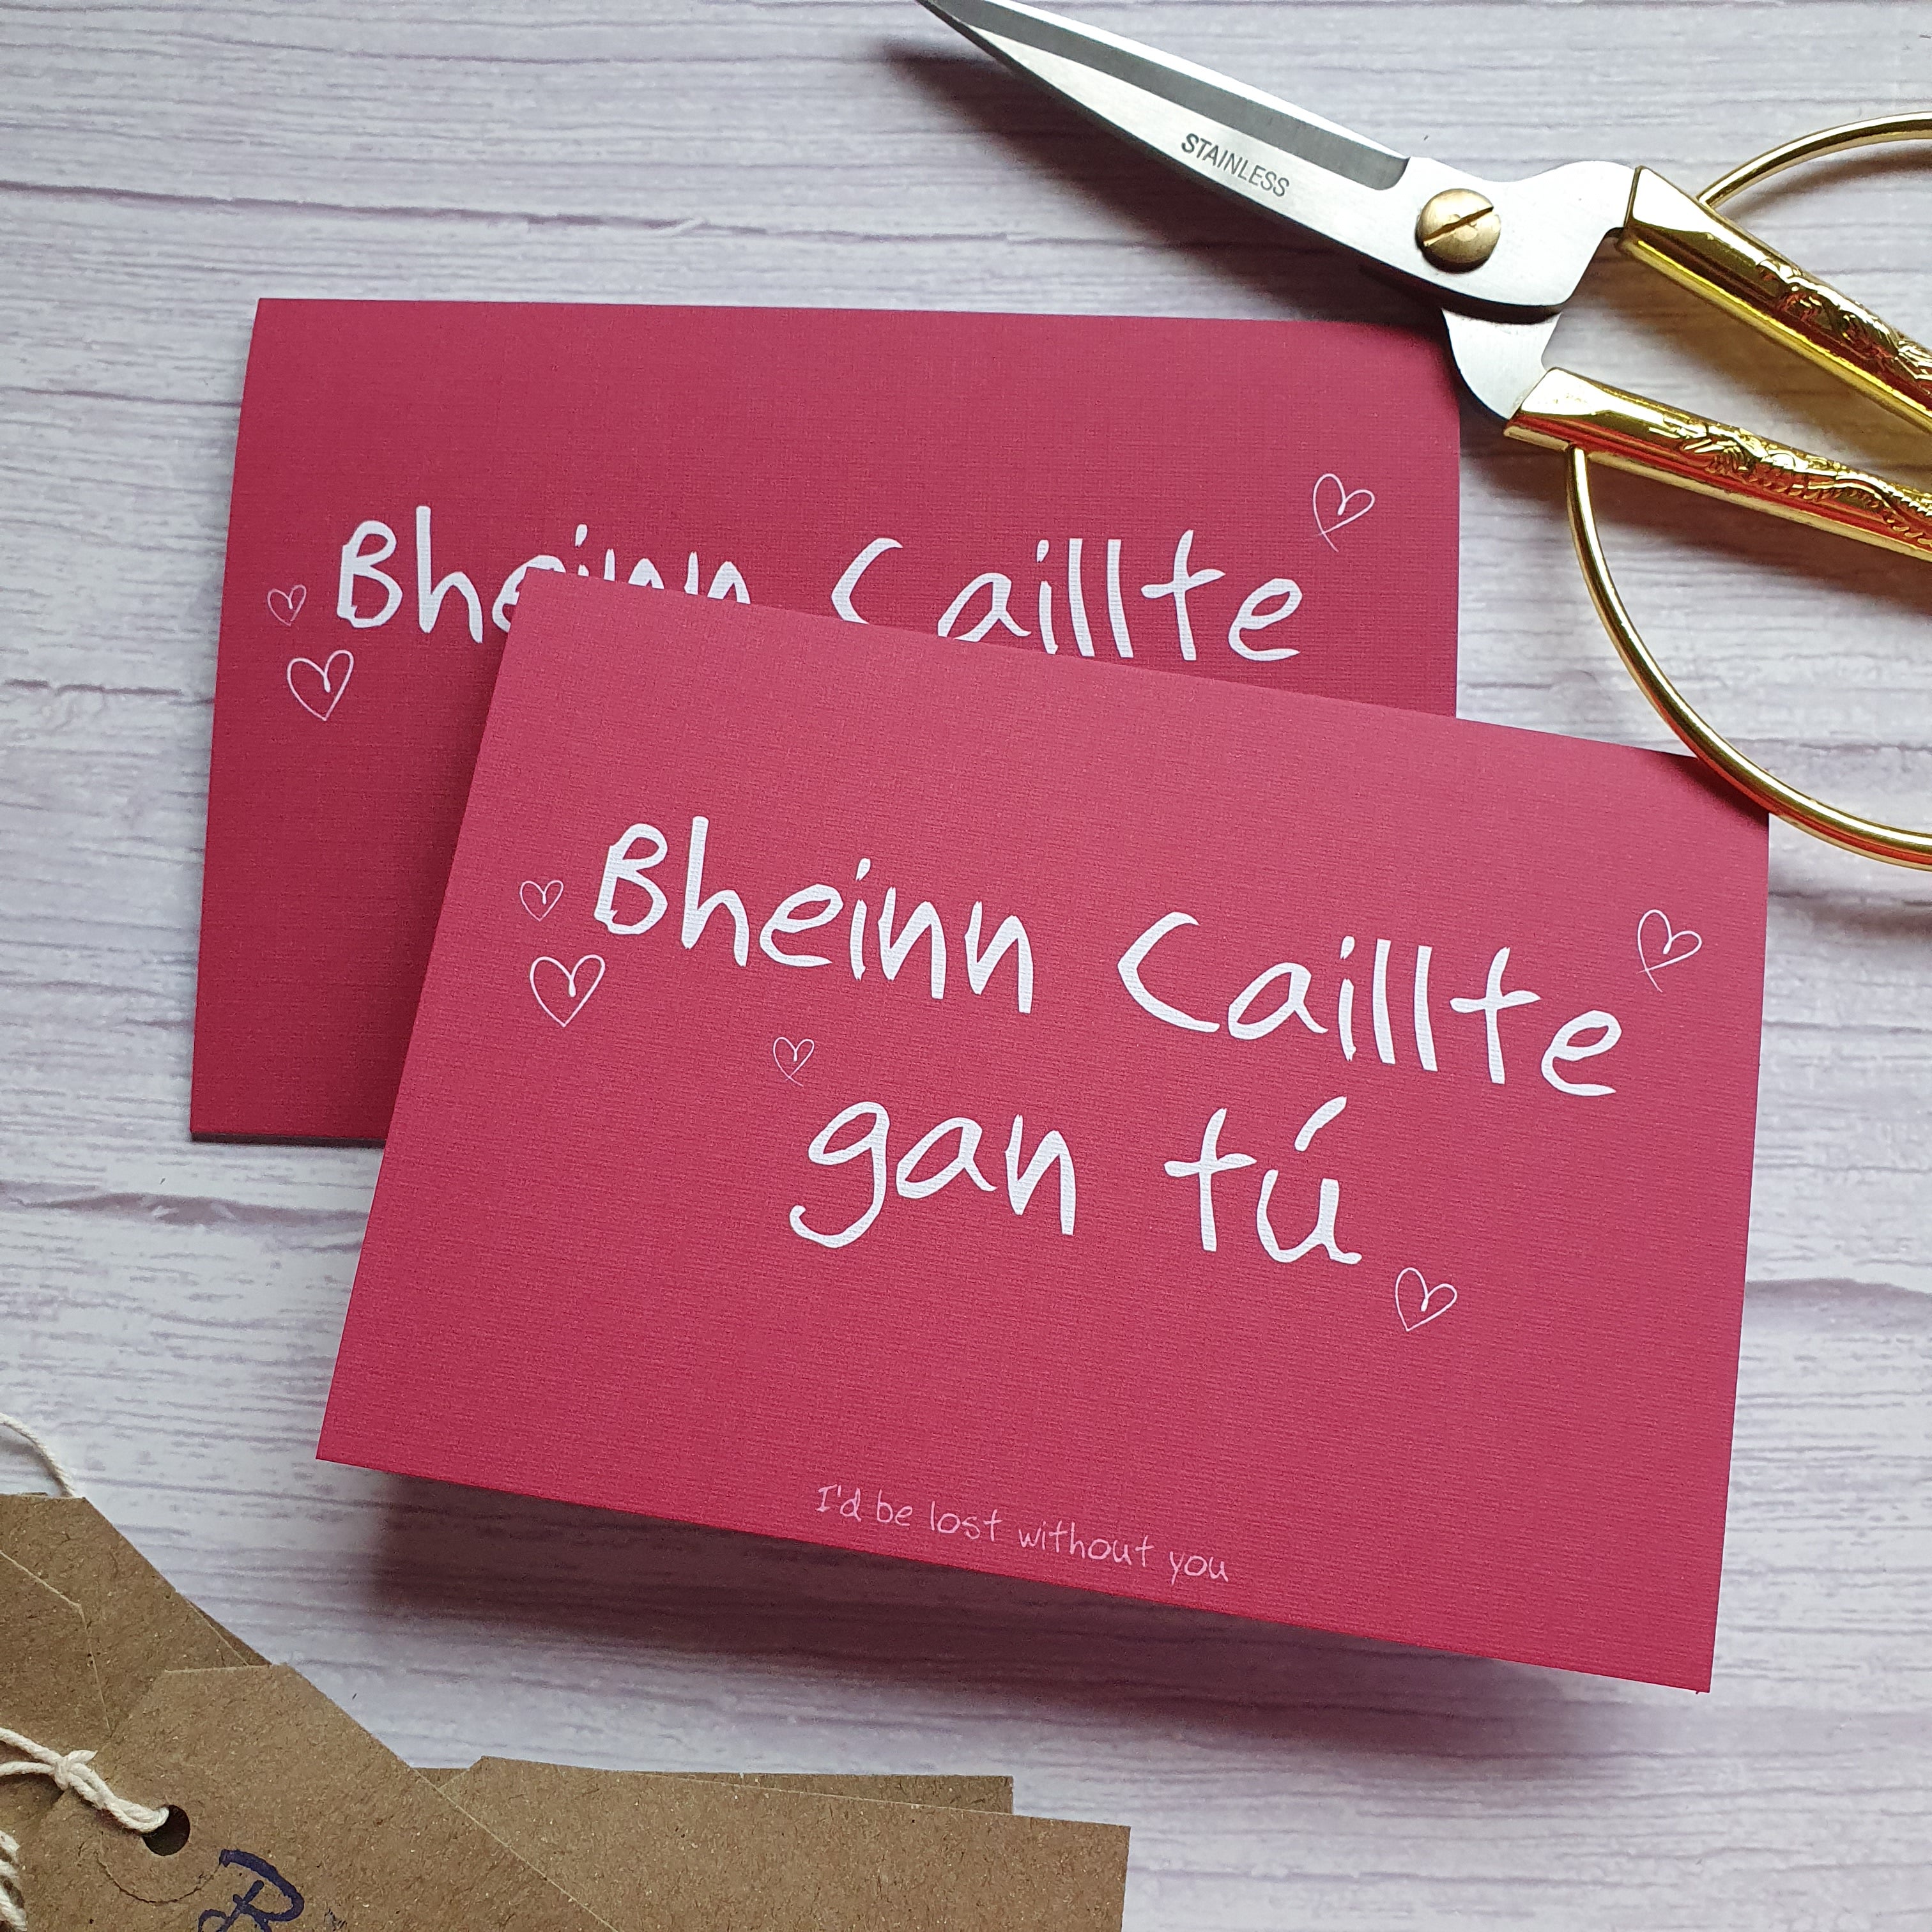 Bheinn Caillte Gan Tú (I'd be lost without you) - Greeting Card